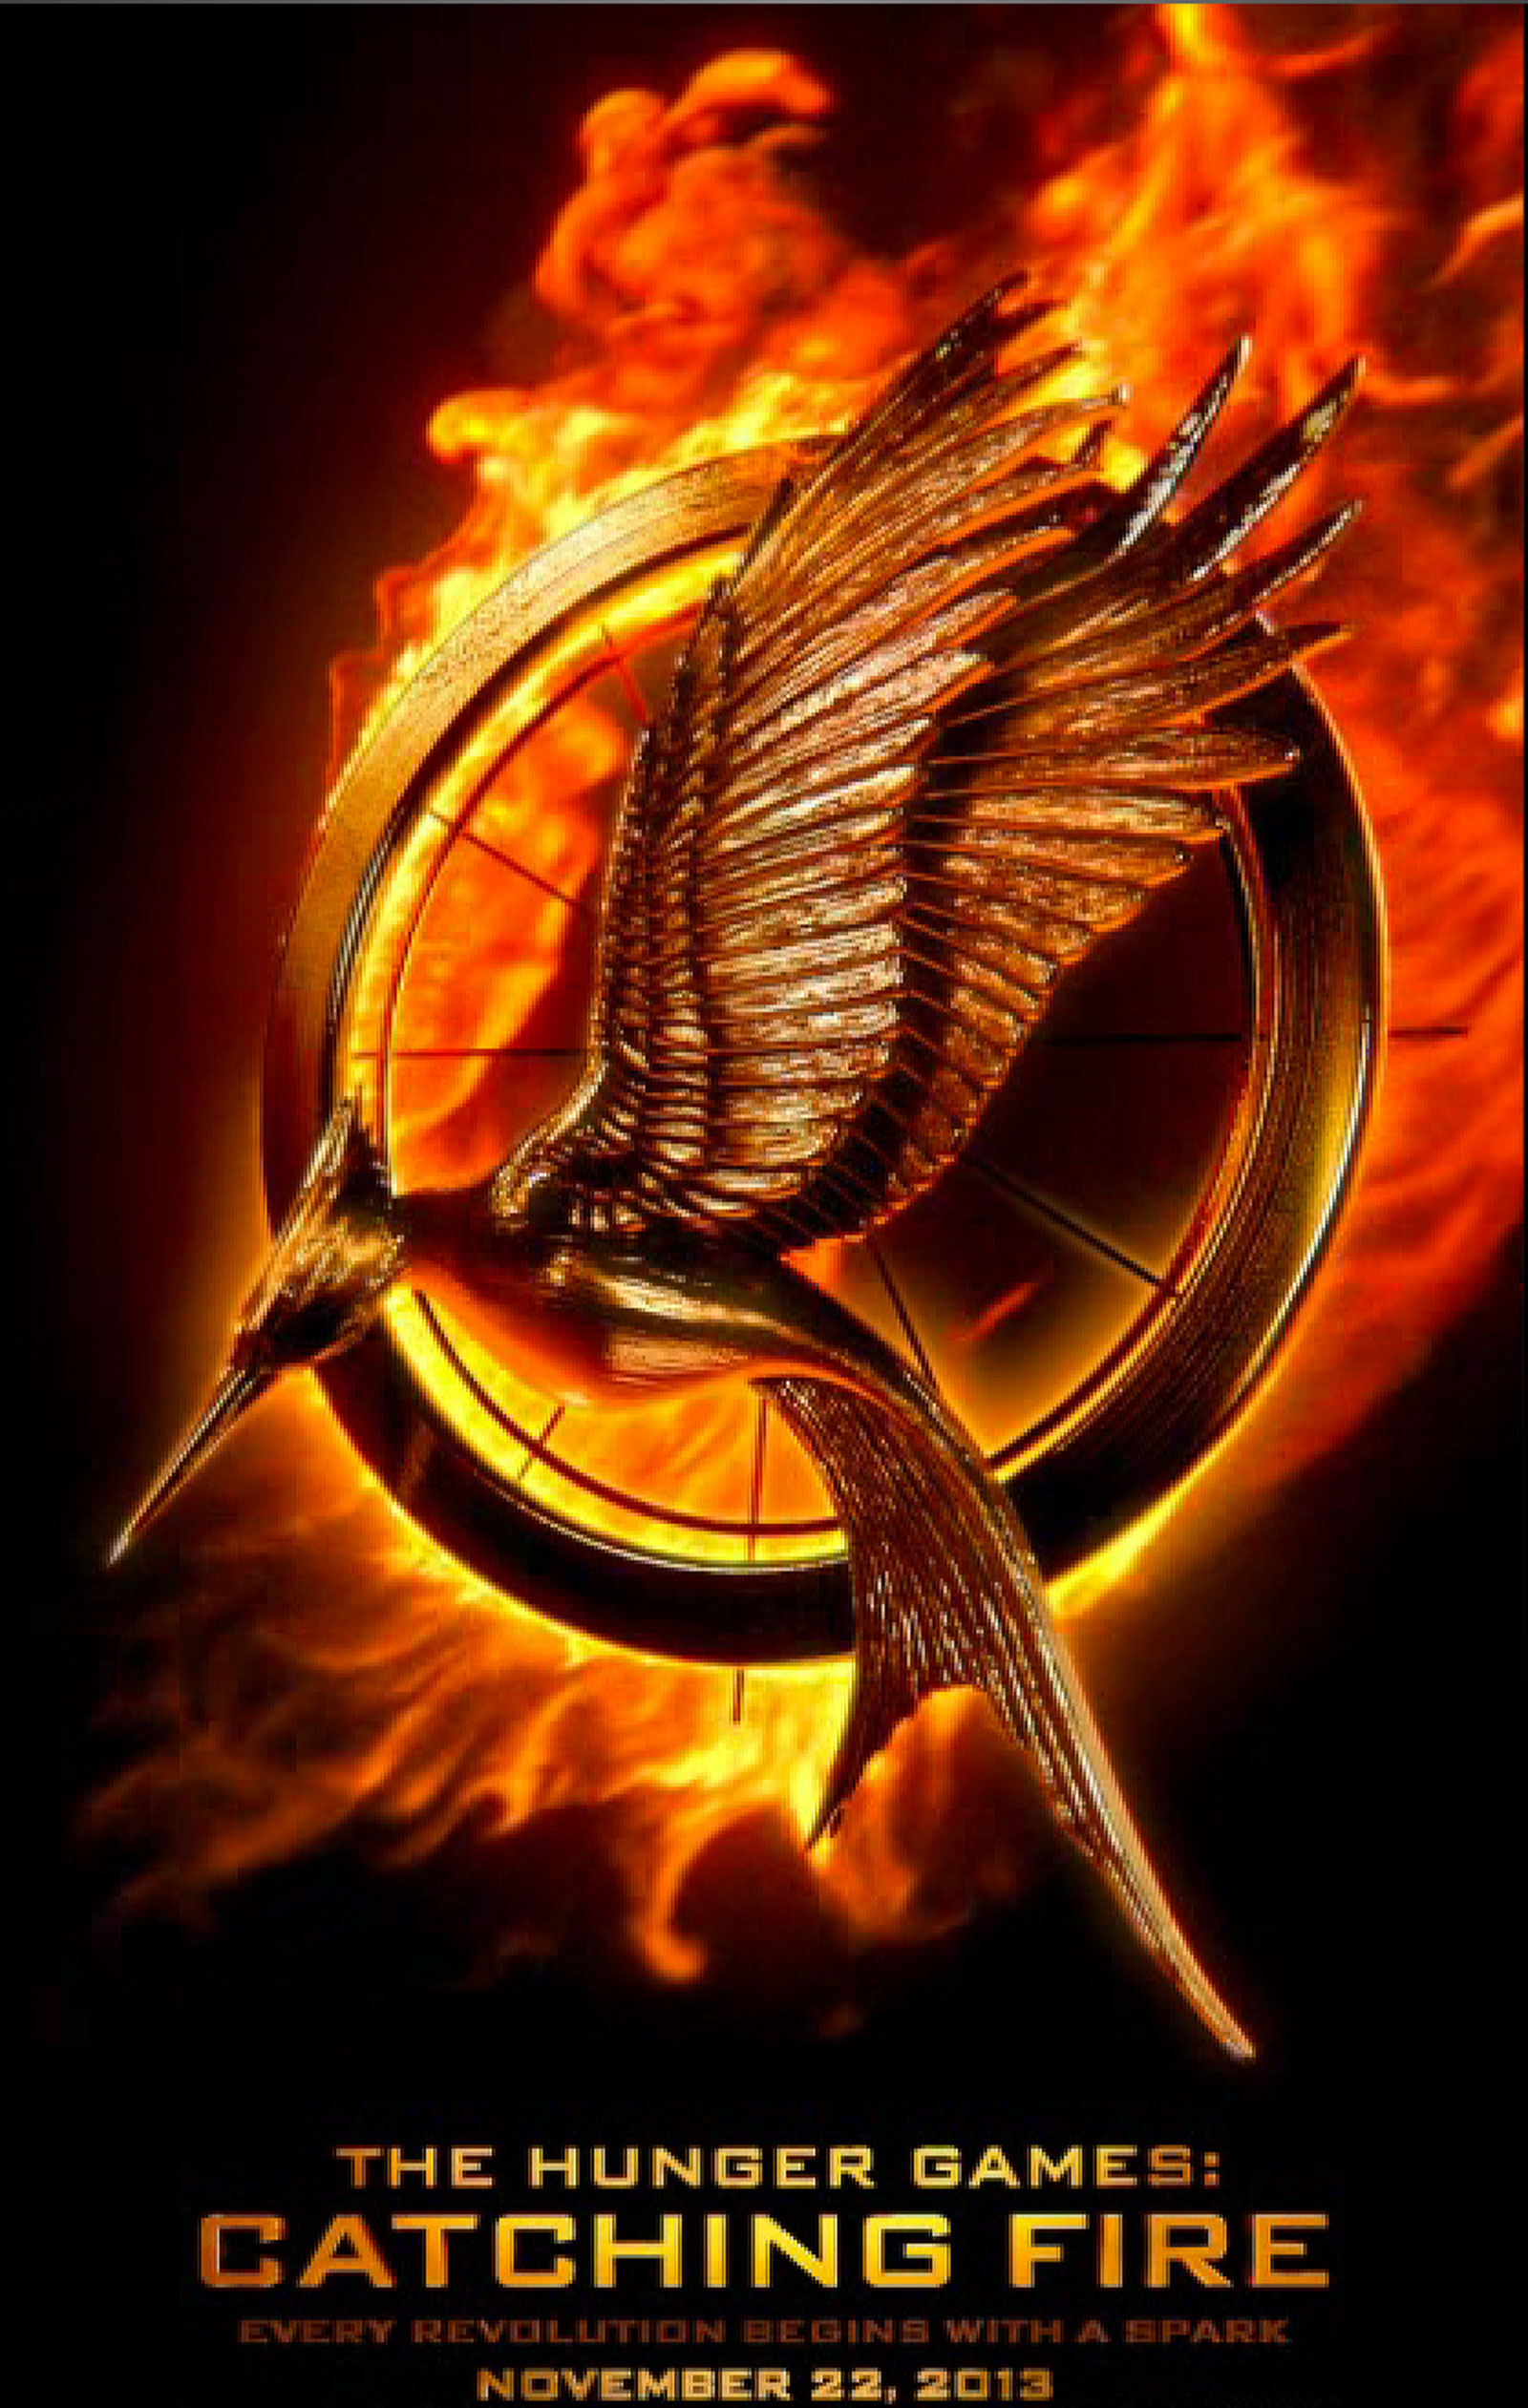 The Hunger Games: Catching Fire download the new